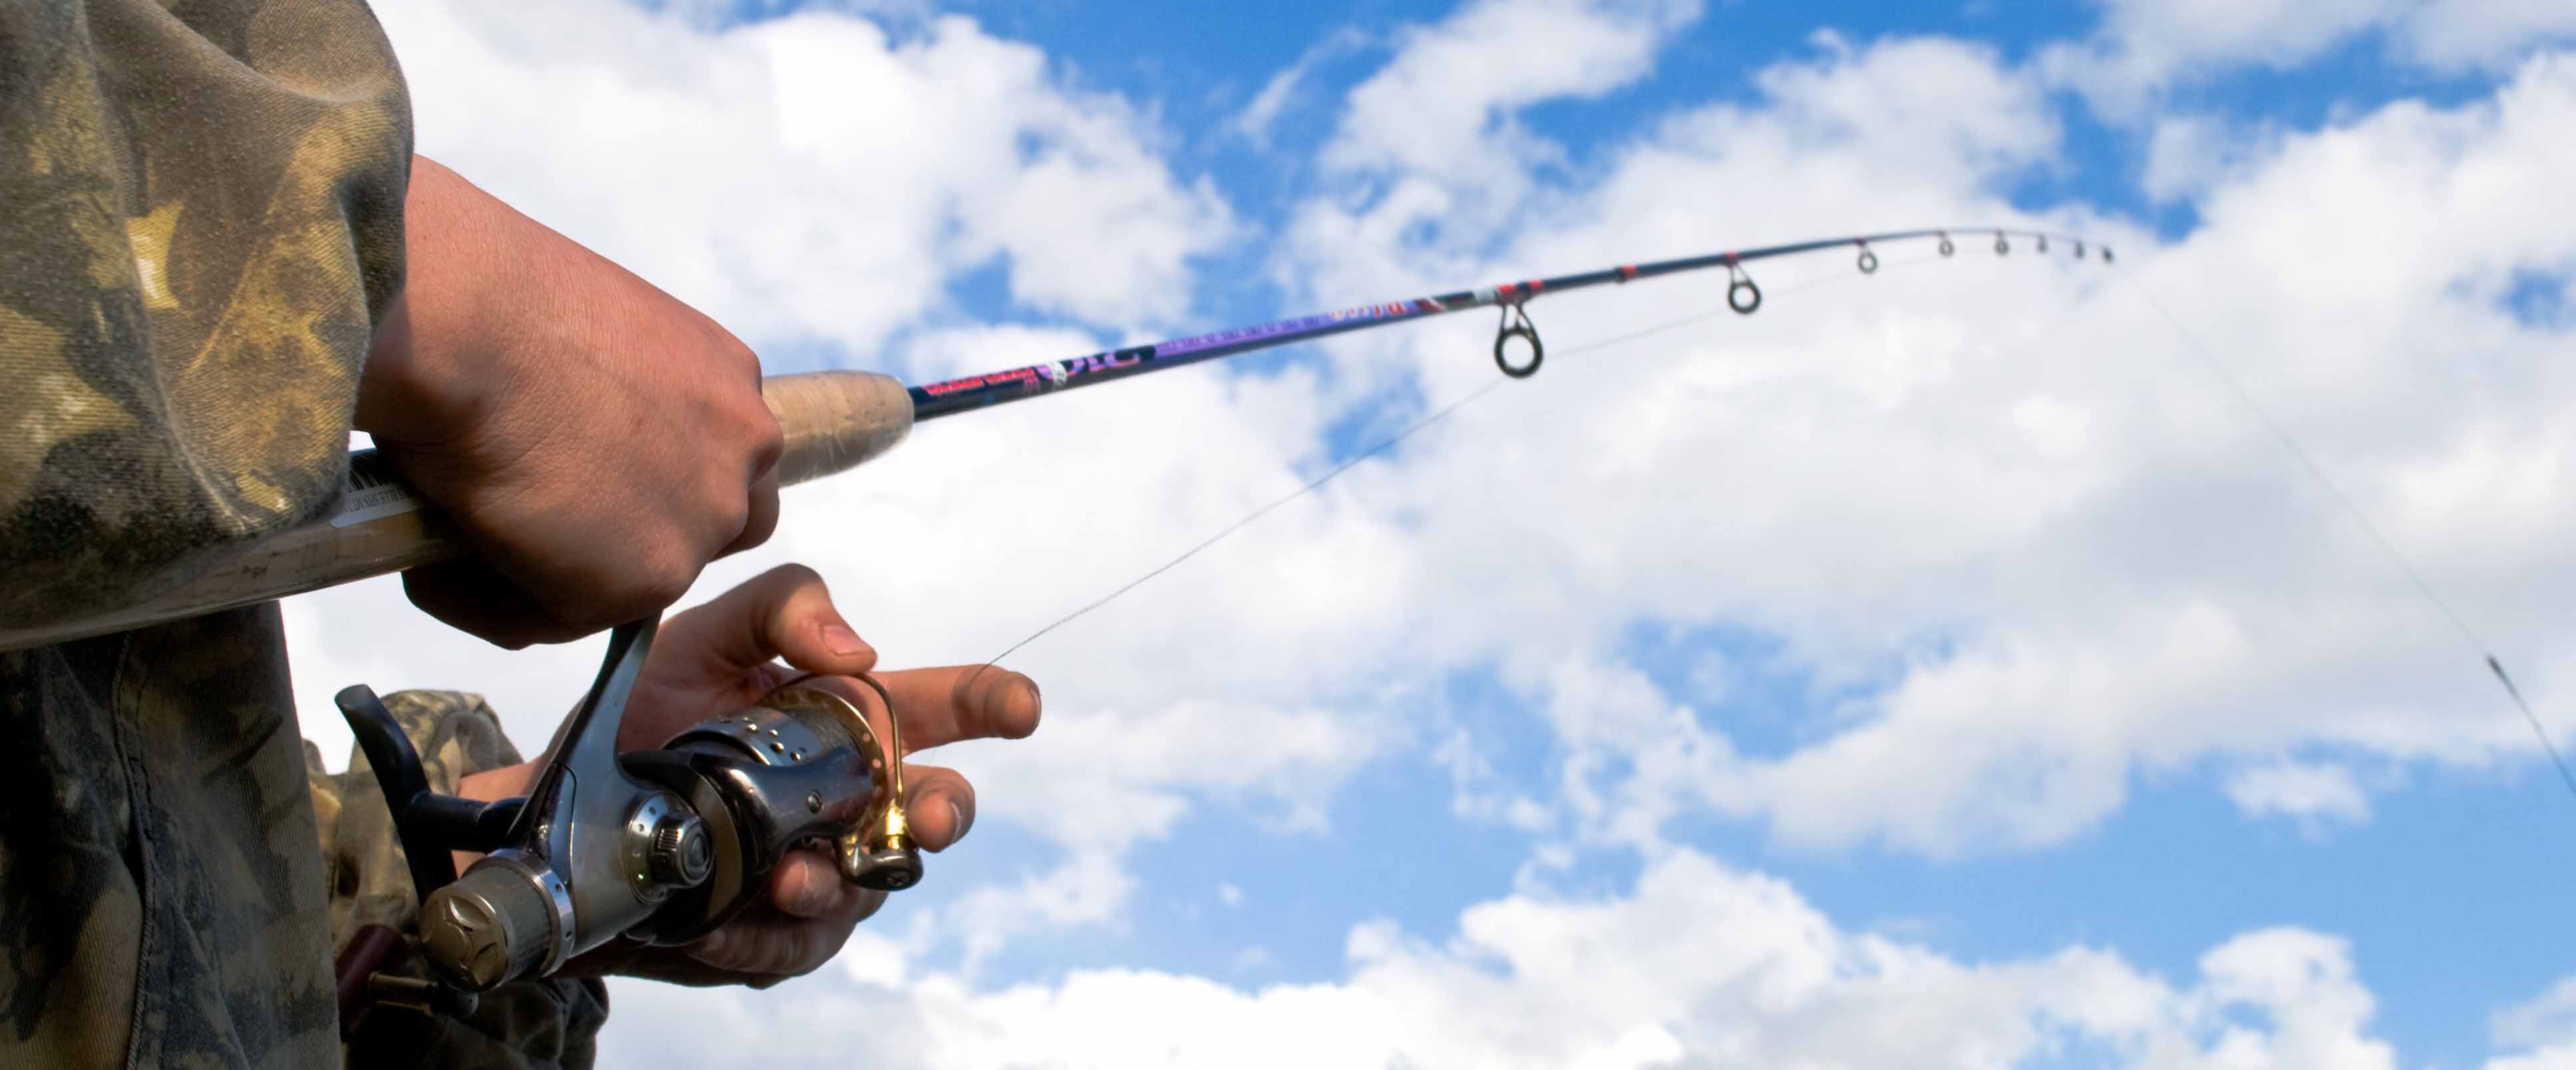 Spinning reels are some of the most-basic fishing tools for both